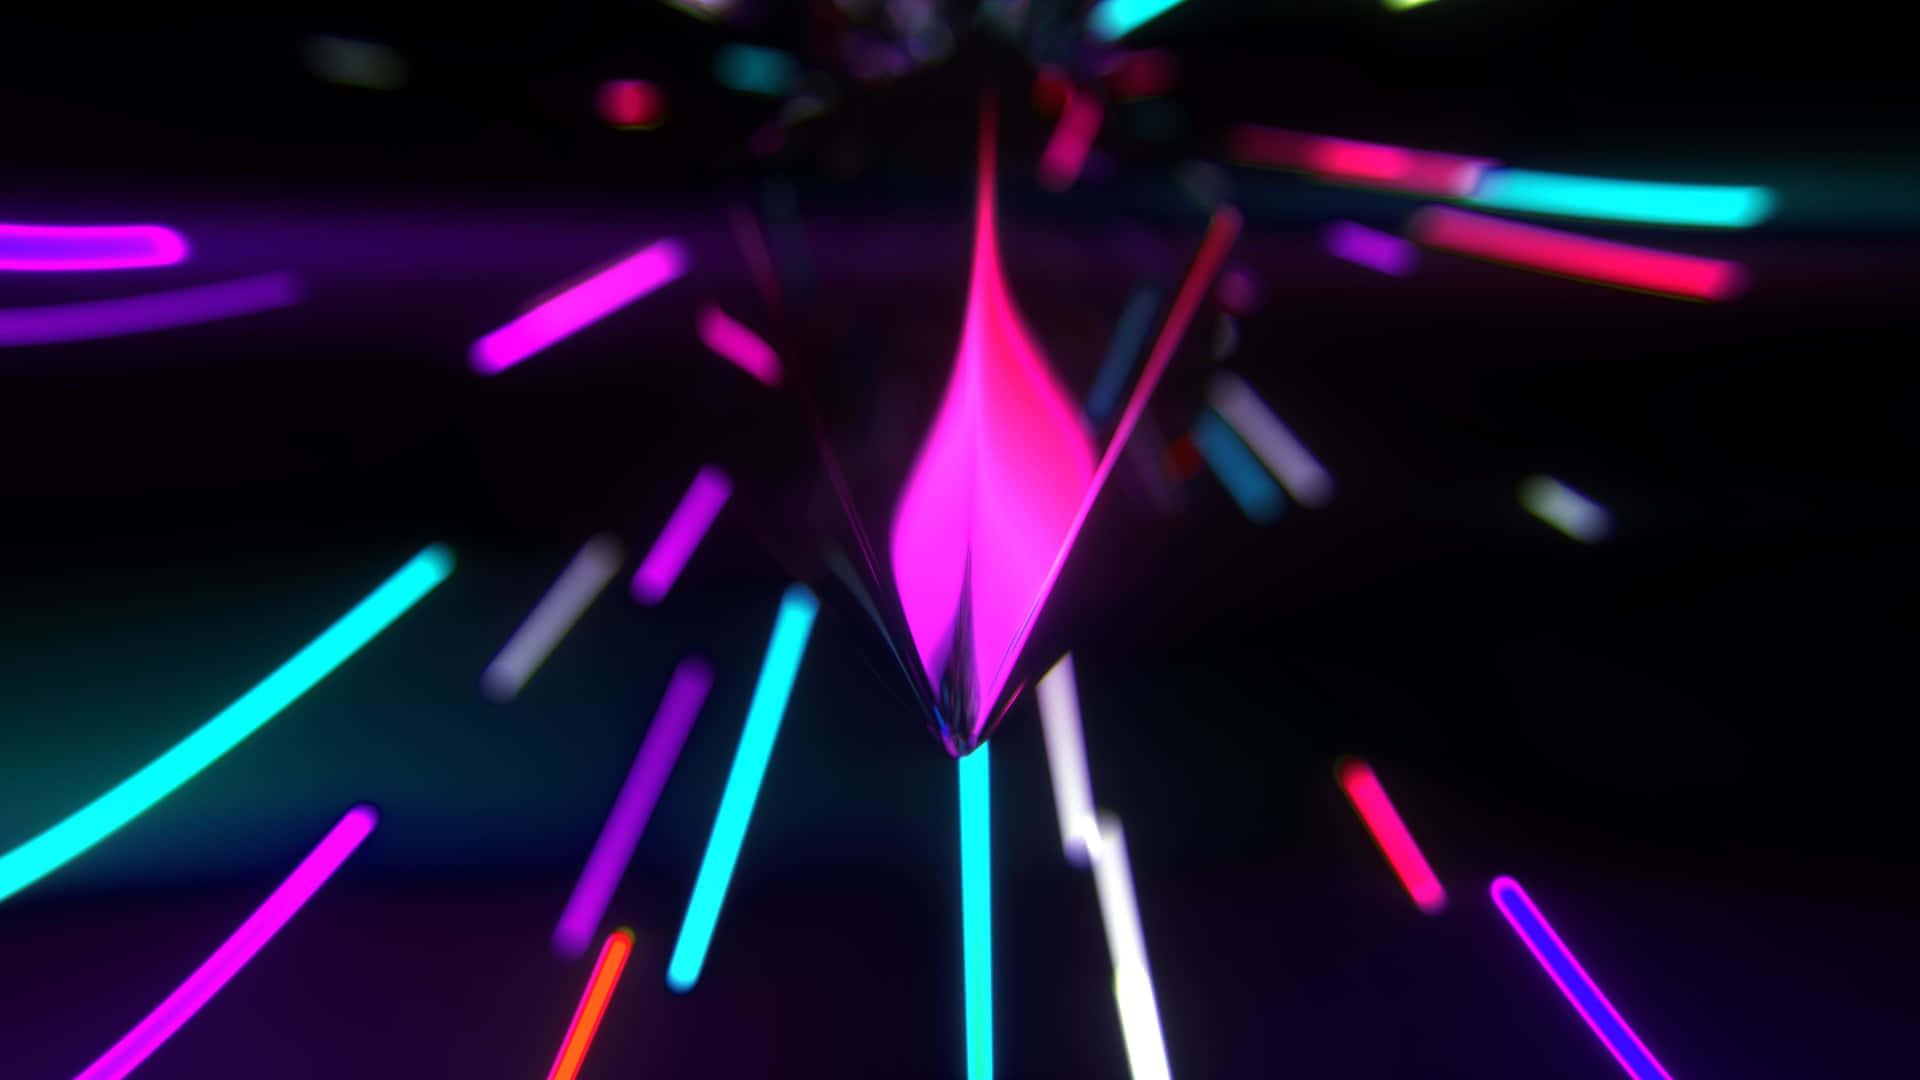 Abstract Neon Lights Explosion Wallpaper